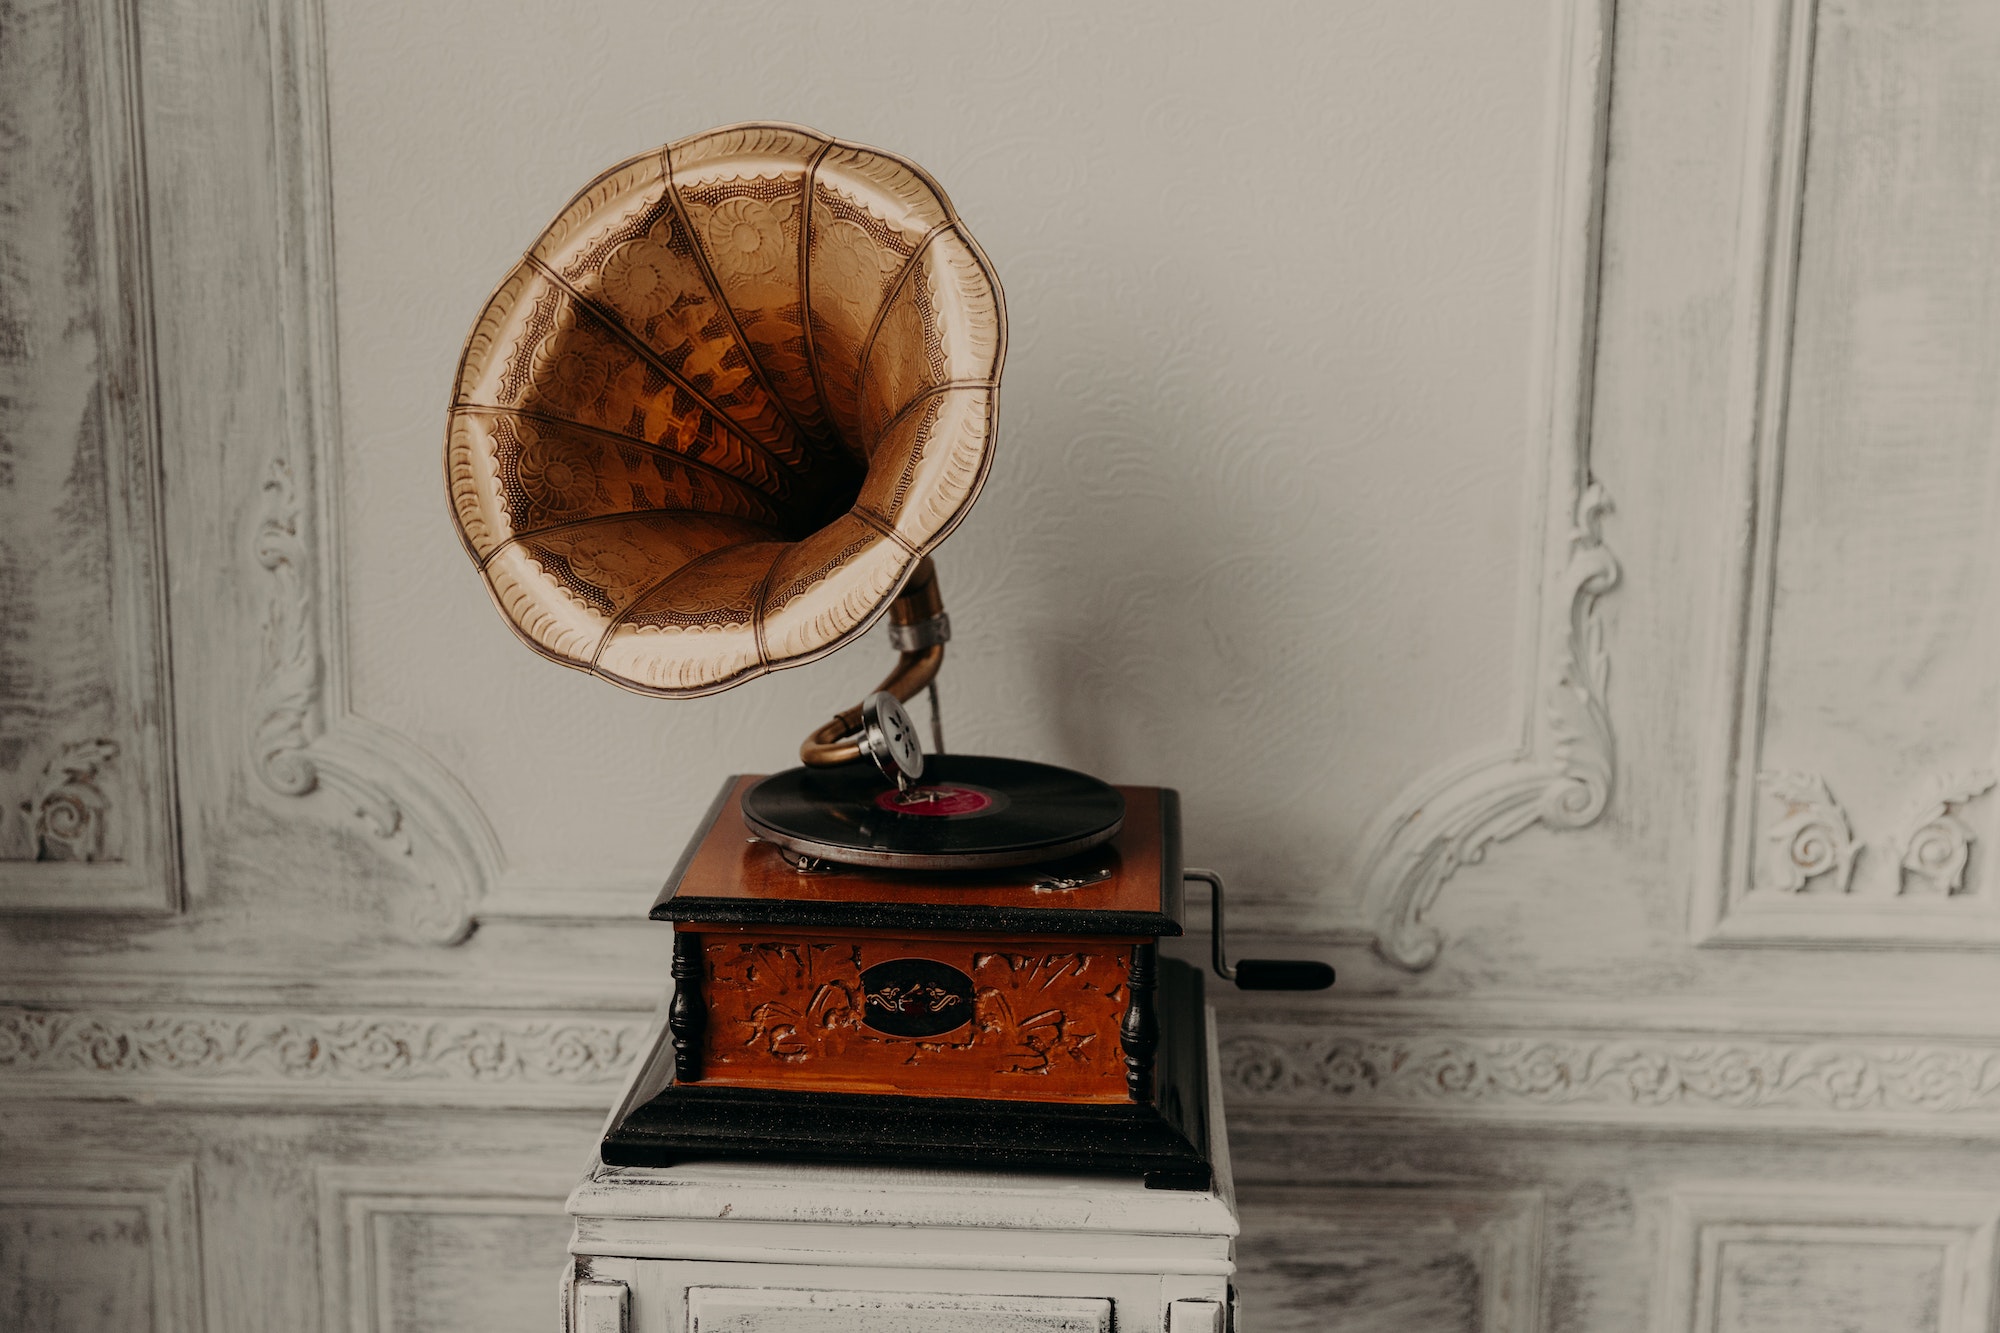 Antique gramophone with retro plate produces pleasant sounds or music